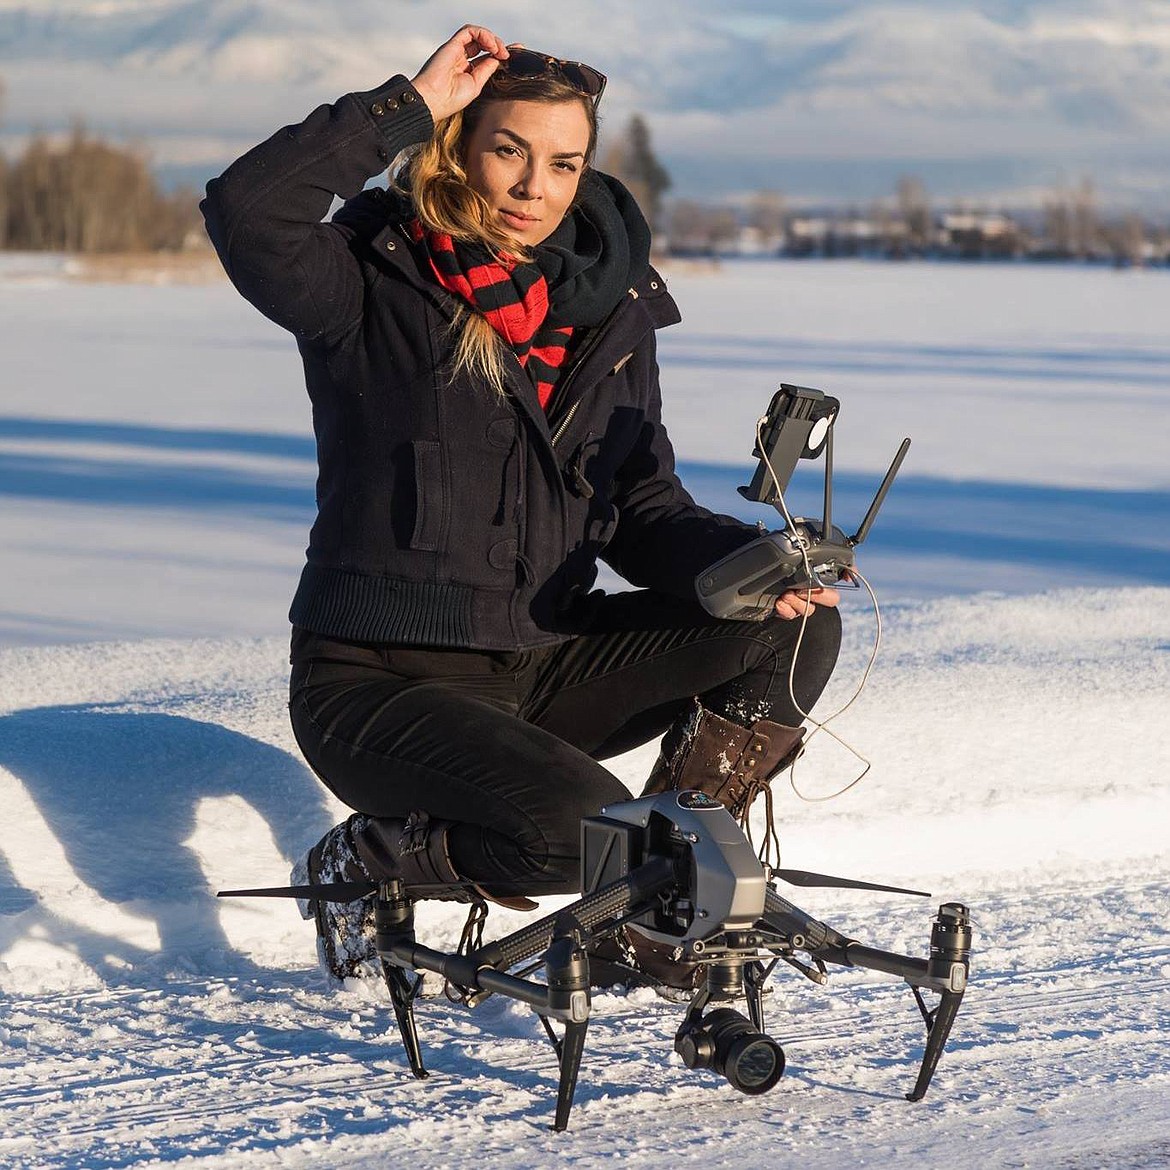 Danielle de Leon with one of Birds Eye of Big Sky’s drones. (Photo provided)